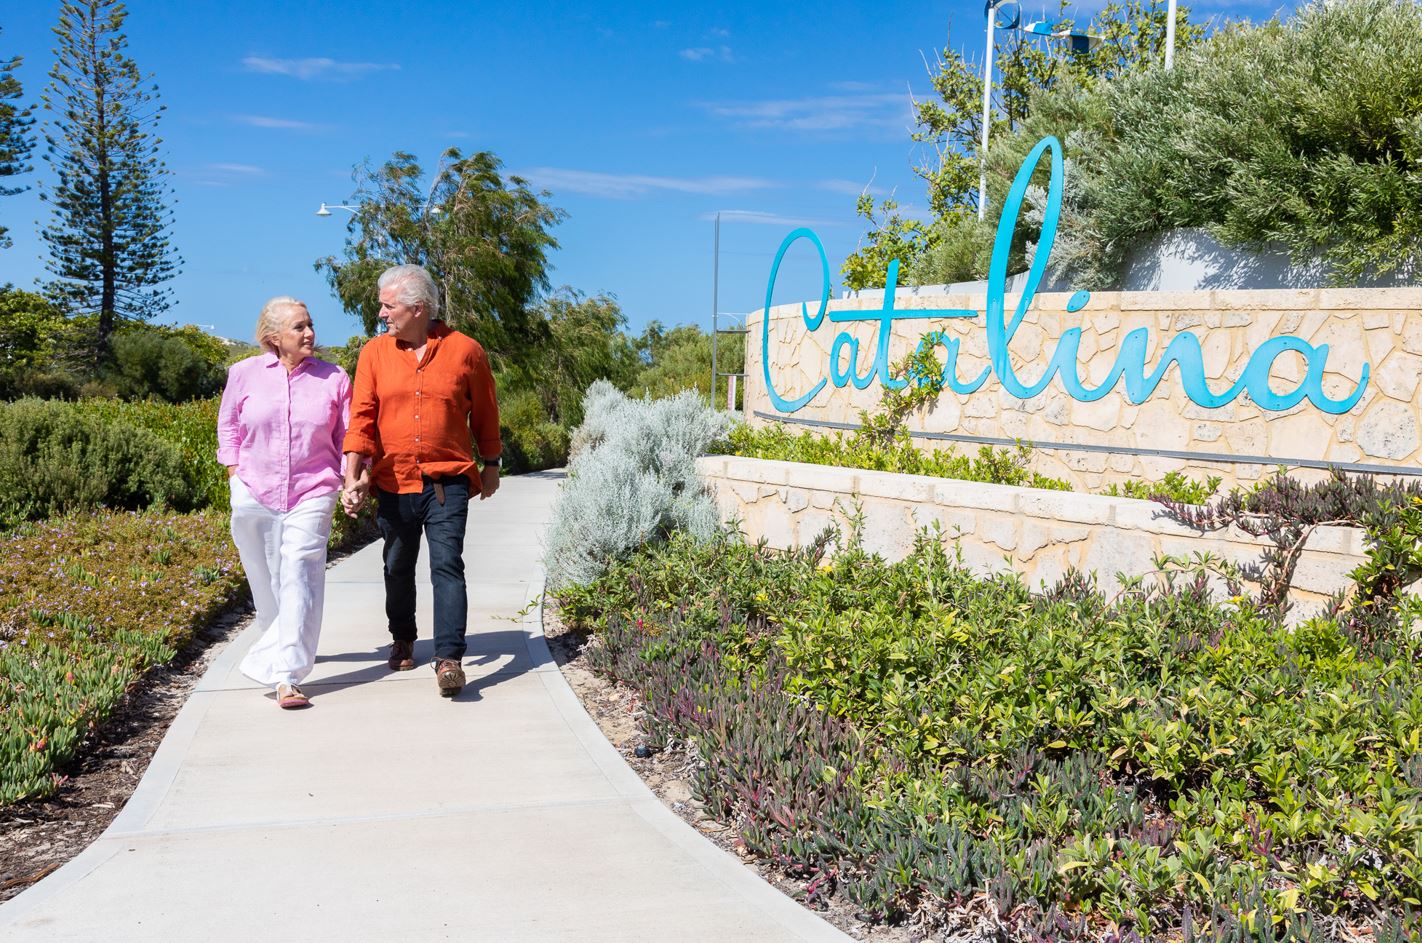 Catalina, Mindarie and Clarkson retirees walking along the foot path next to the Catalina Beach entry statement